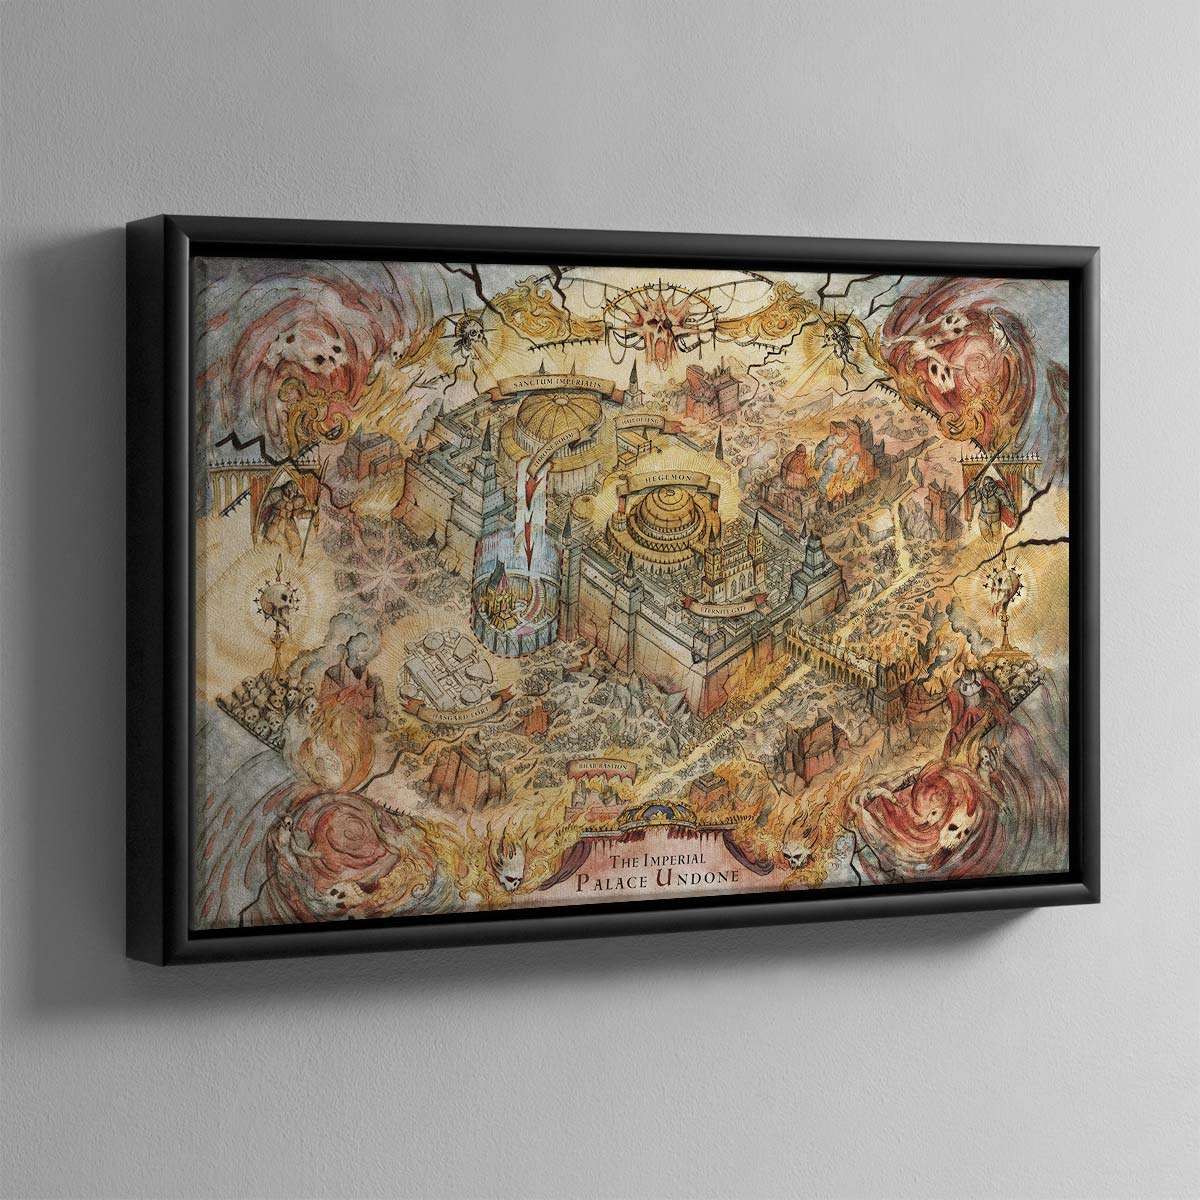 Siege of Terra The End and the Death (Volume 1) Map – Framed Canvas